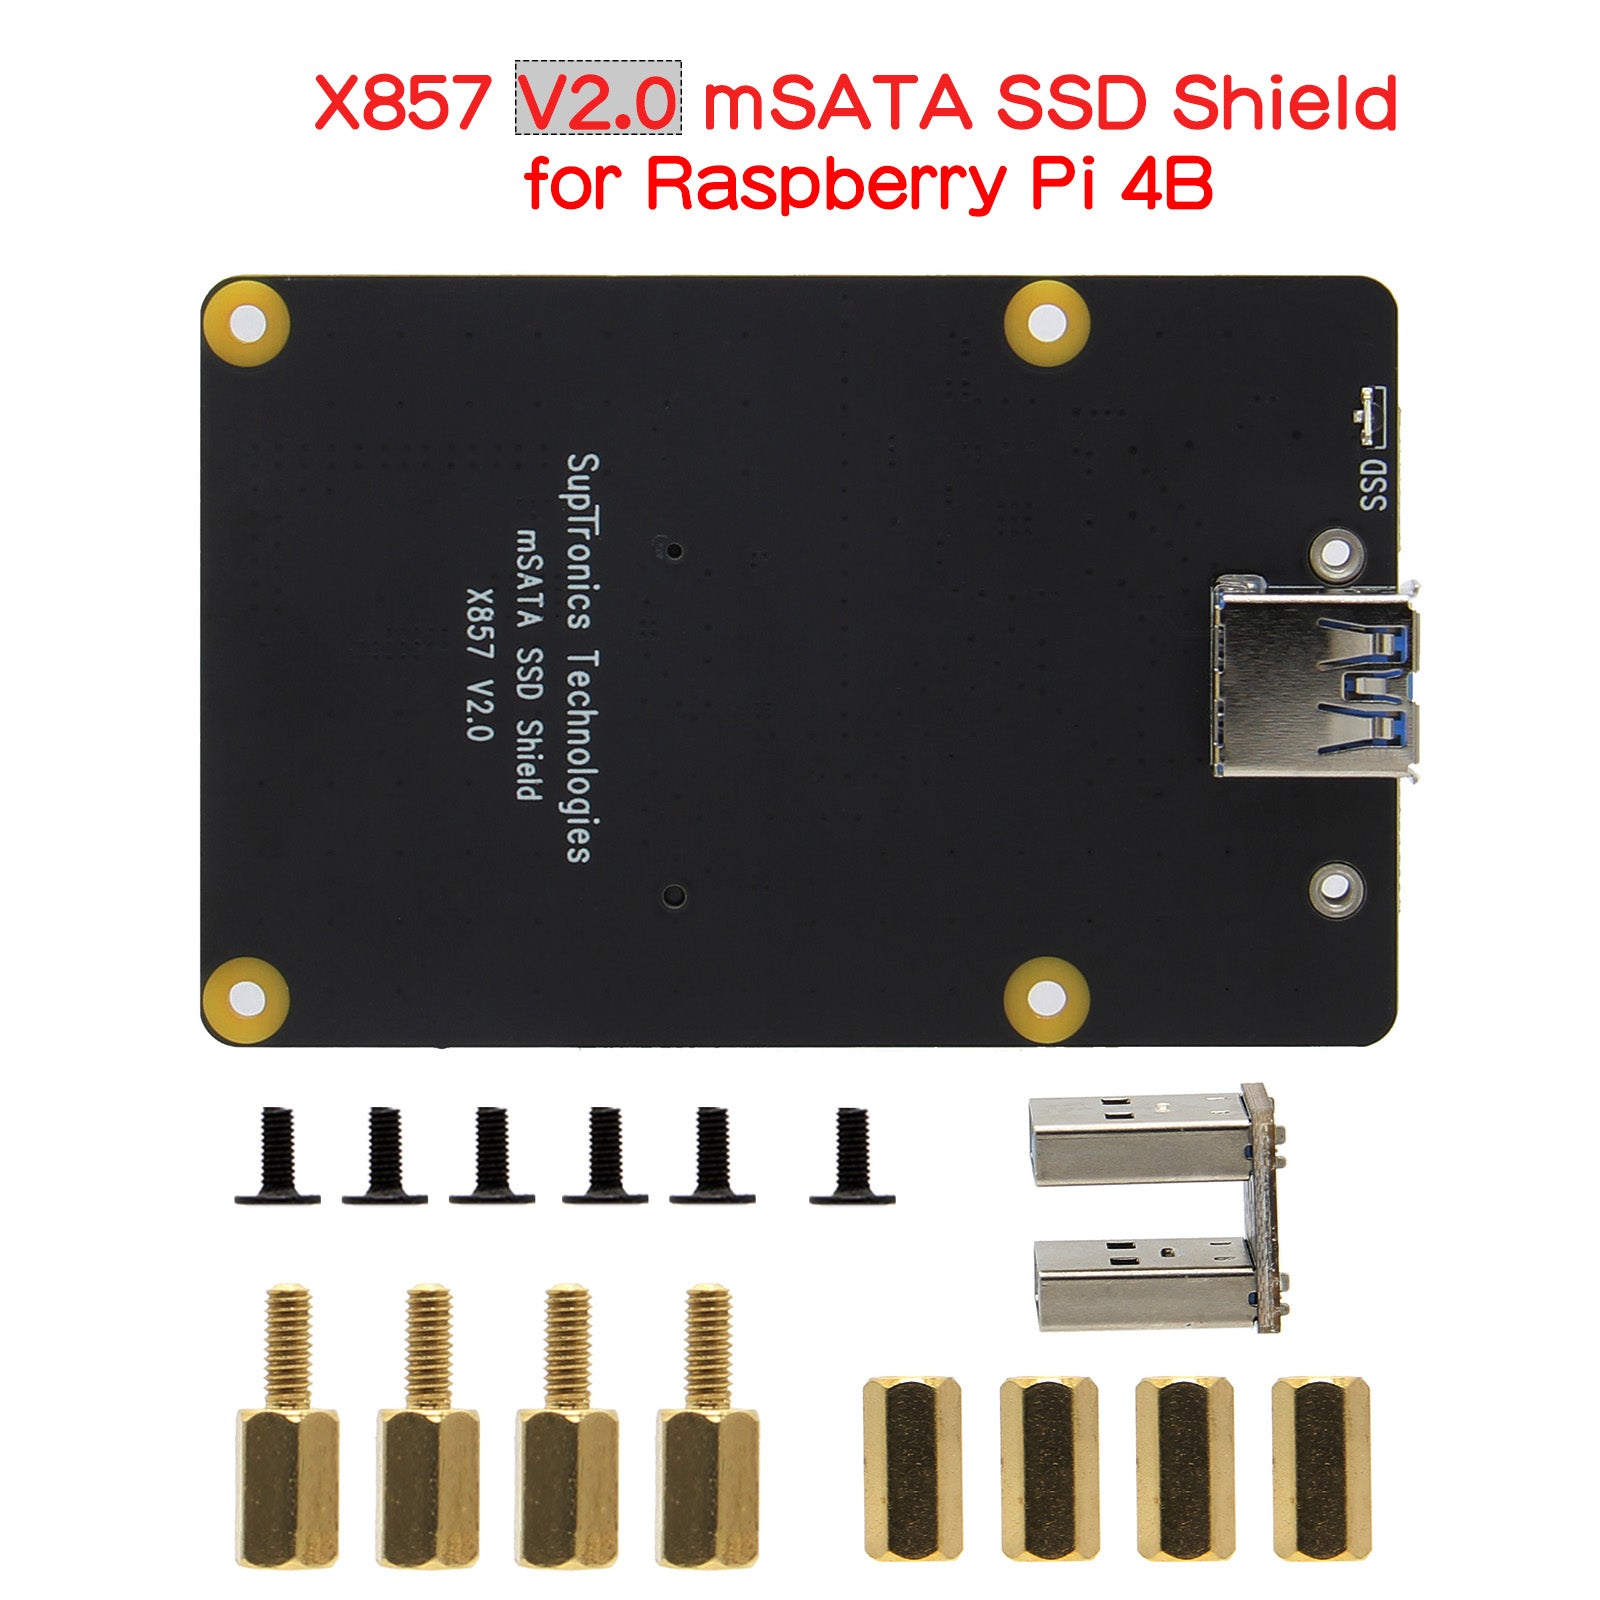 For Raspberry Pi 4, X857 V2.0 mSATA SSD Storage Expansion Board with USB3.1  Connector for Raspberry Pi 4 Model B - AliExpress